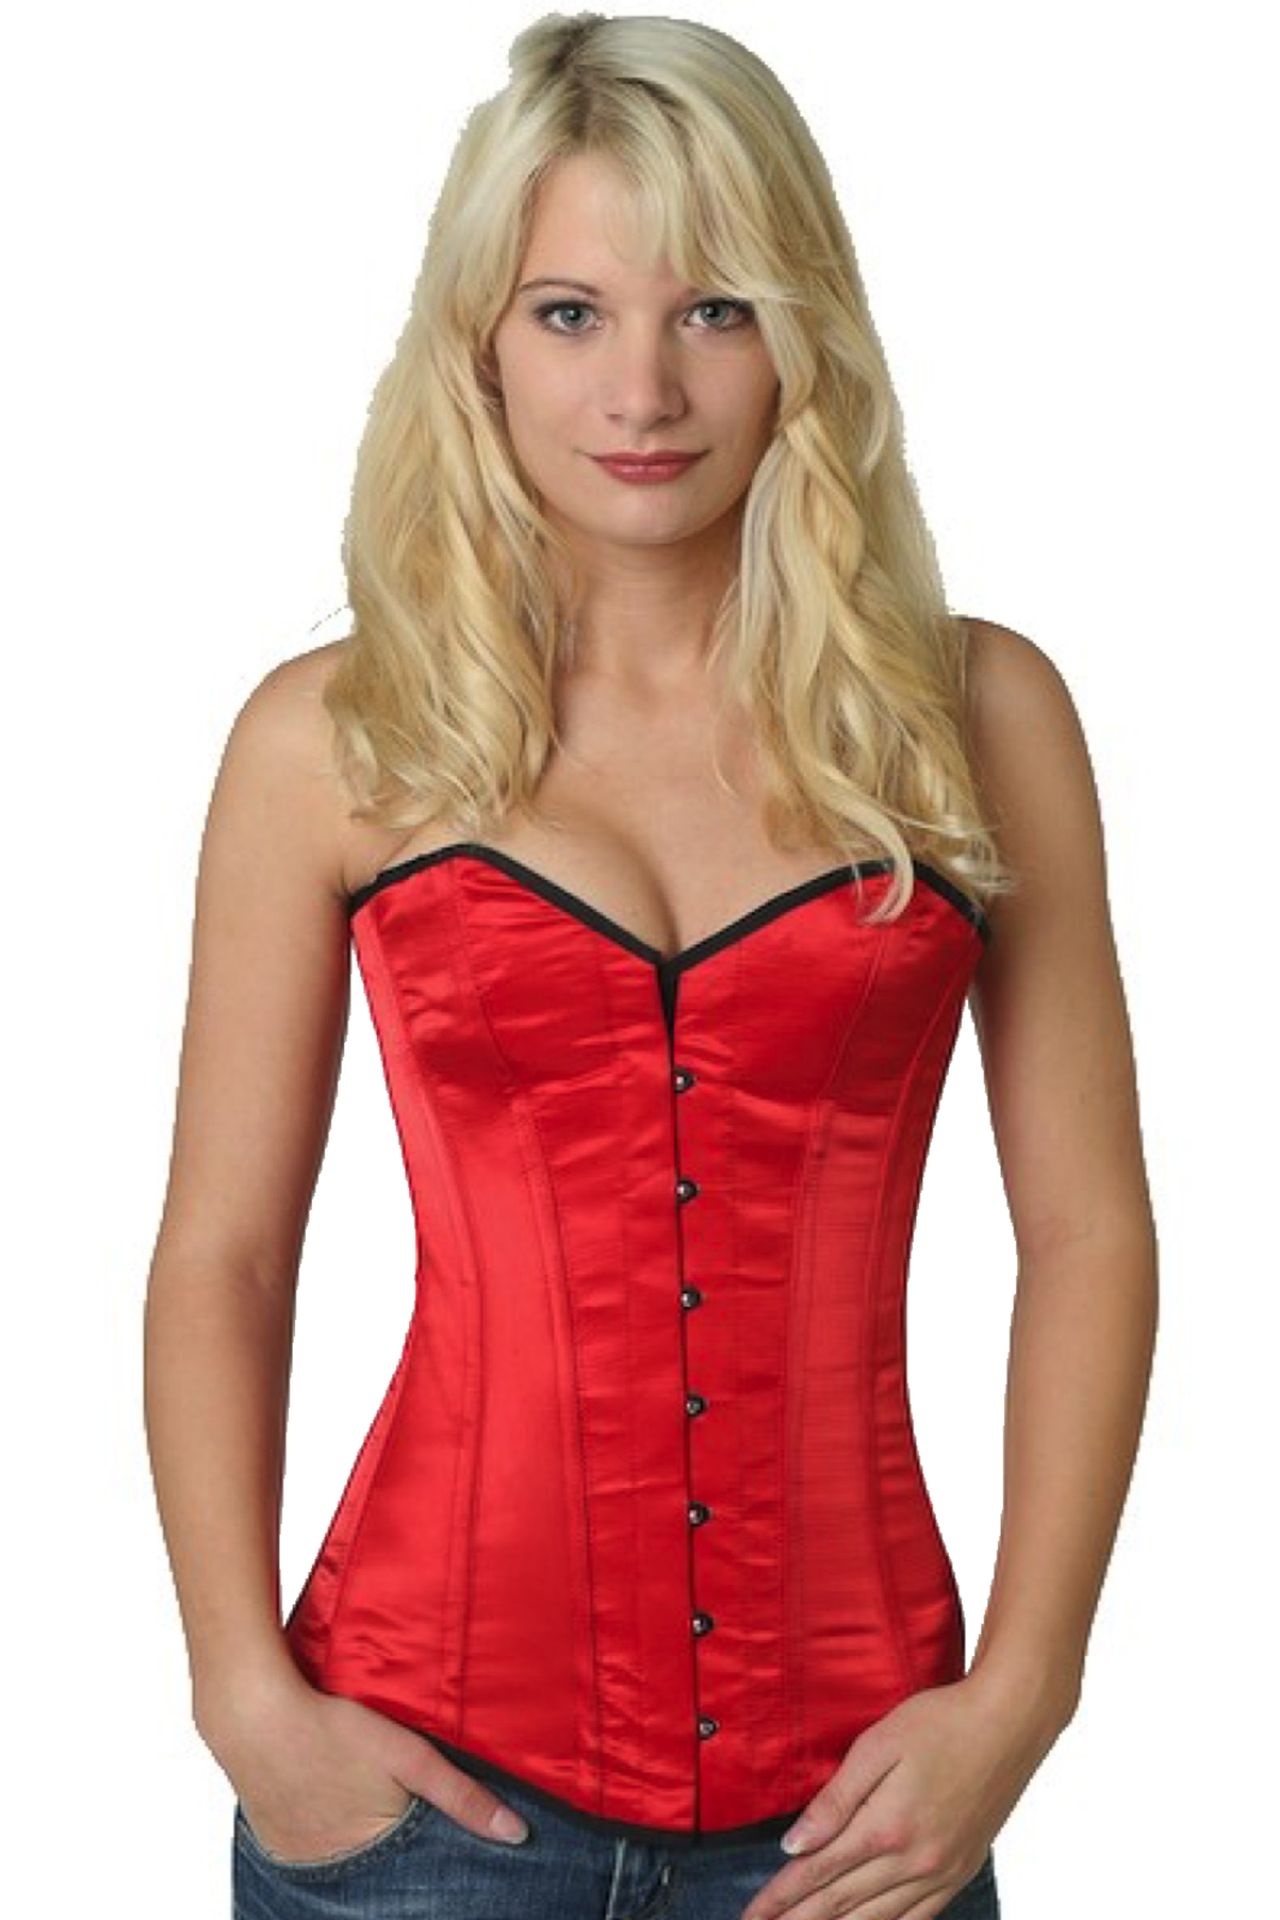 Corset red satin overbust sy06